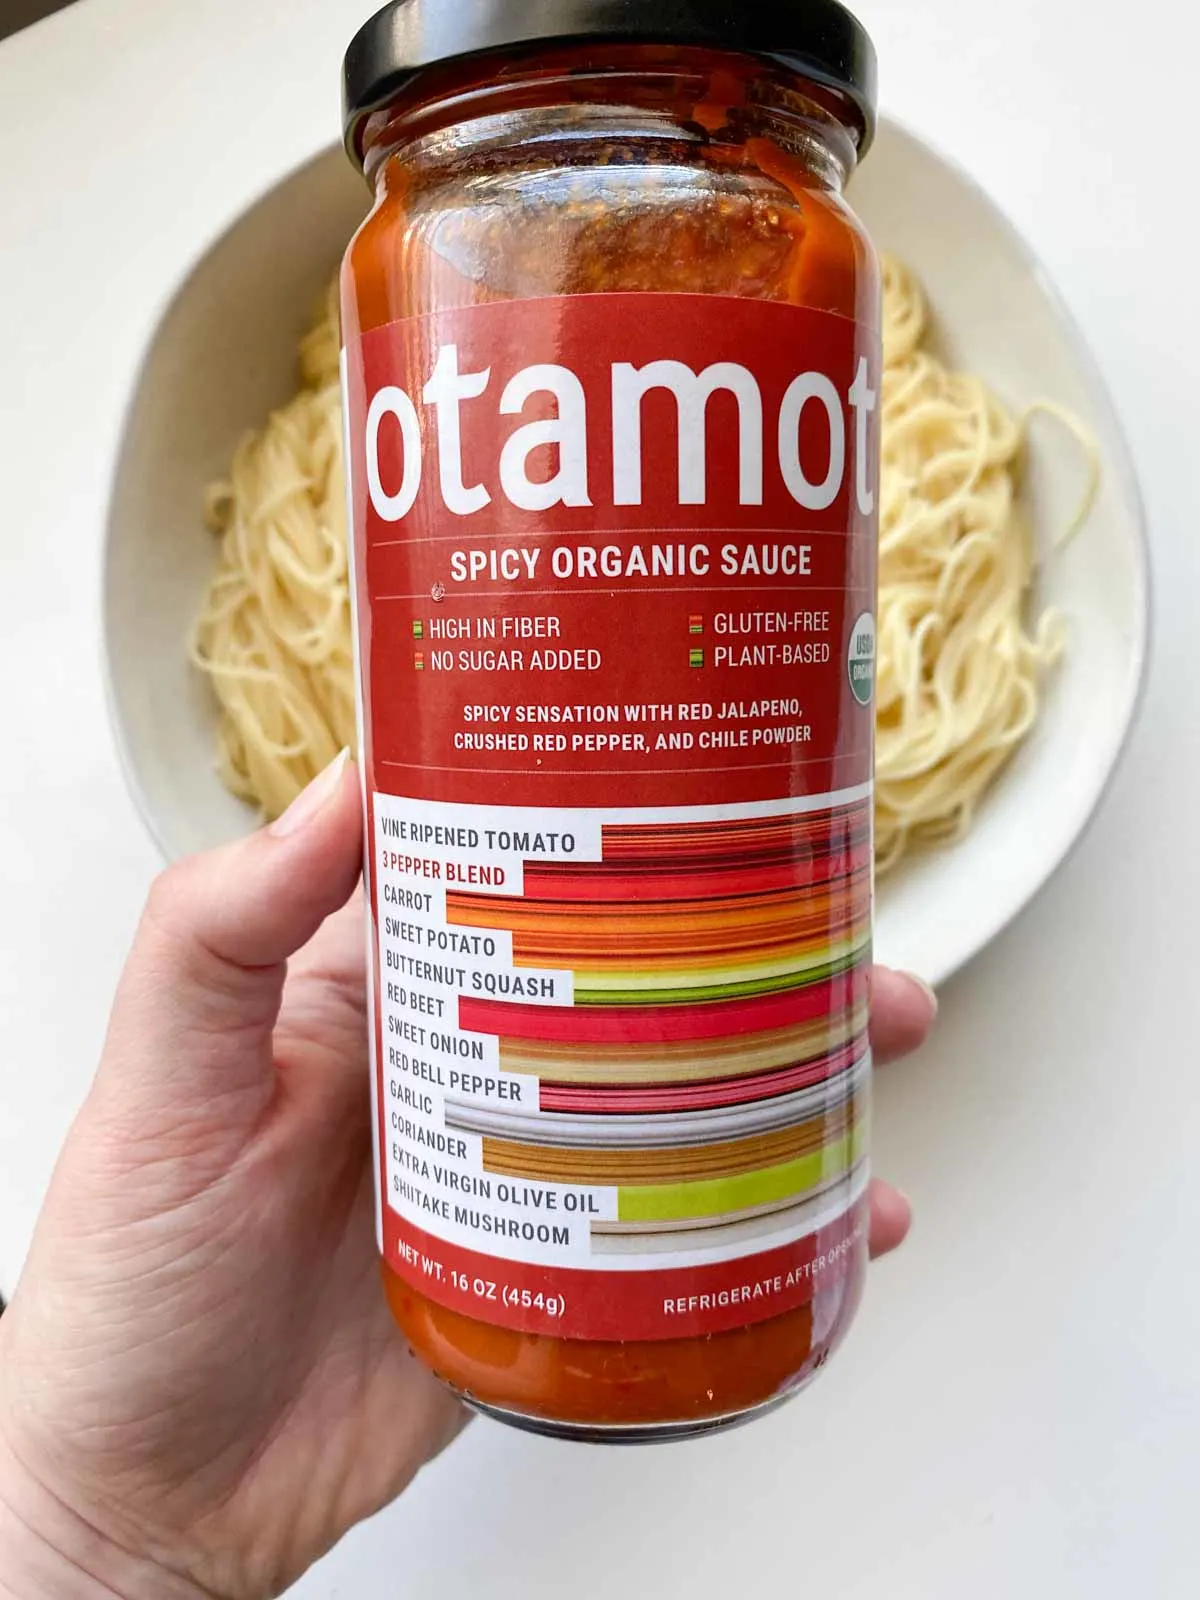 jar of Otamot spicy organic sauce over a bowl of spaghetti noodles